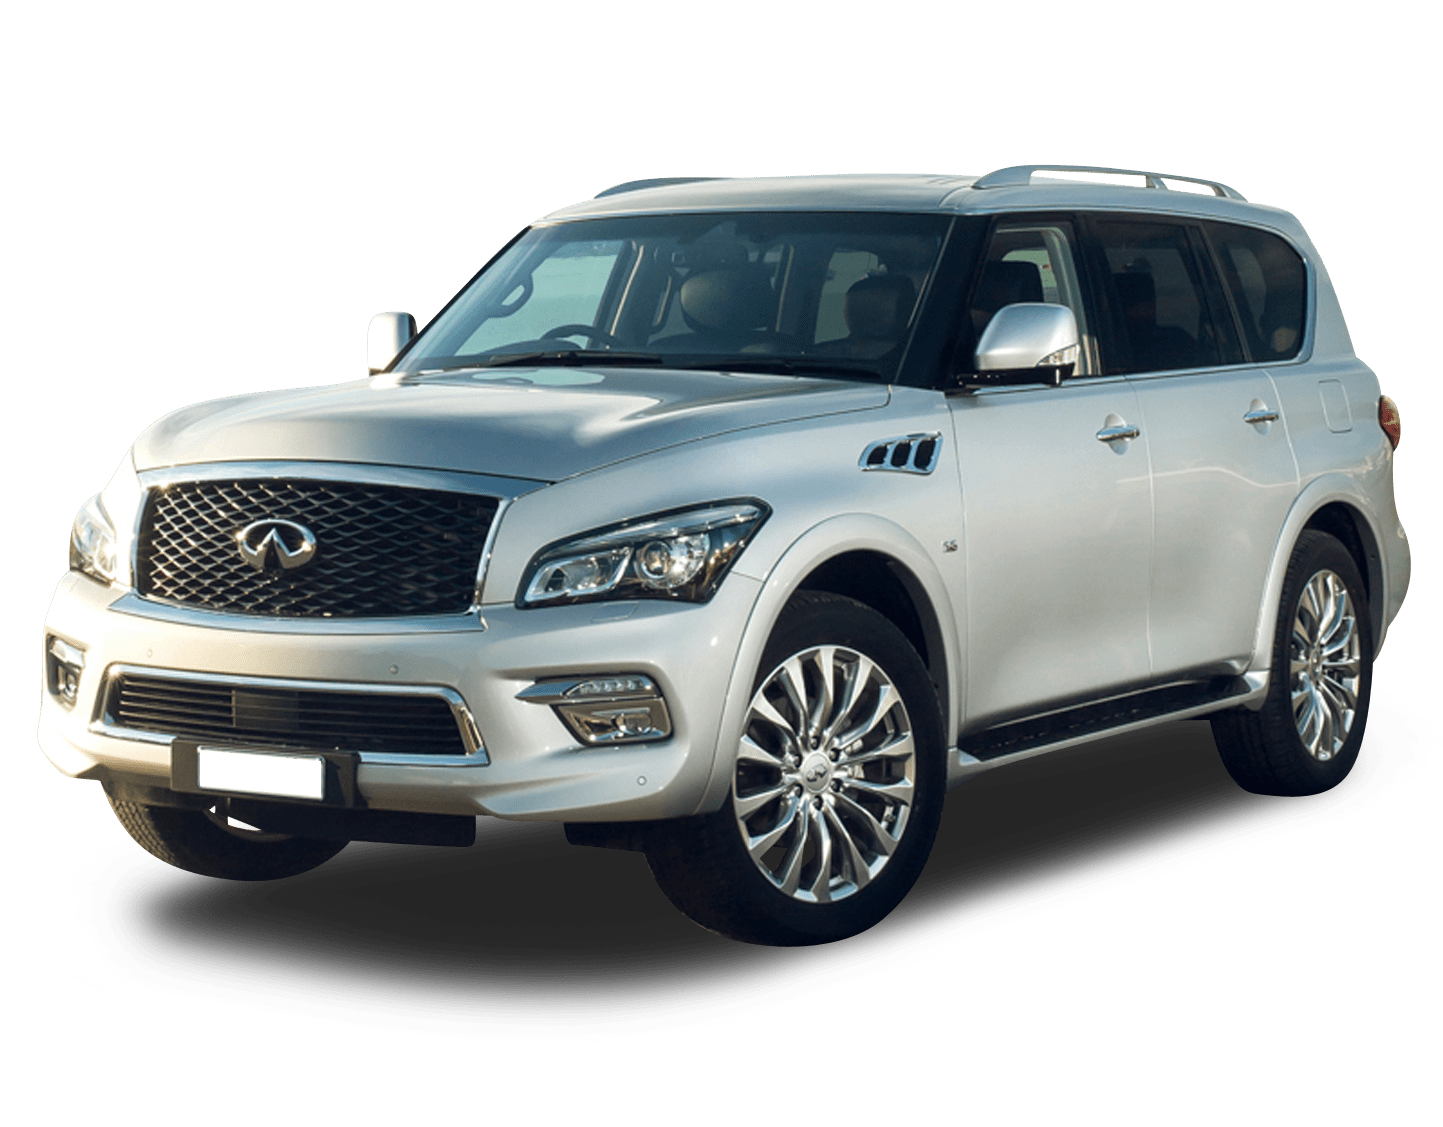 Infiniti Qx80 Review Price For Sale Colours Interior Specs Carsguide